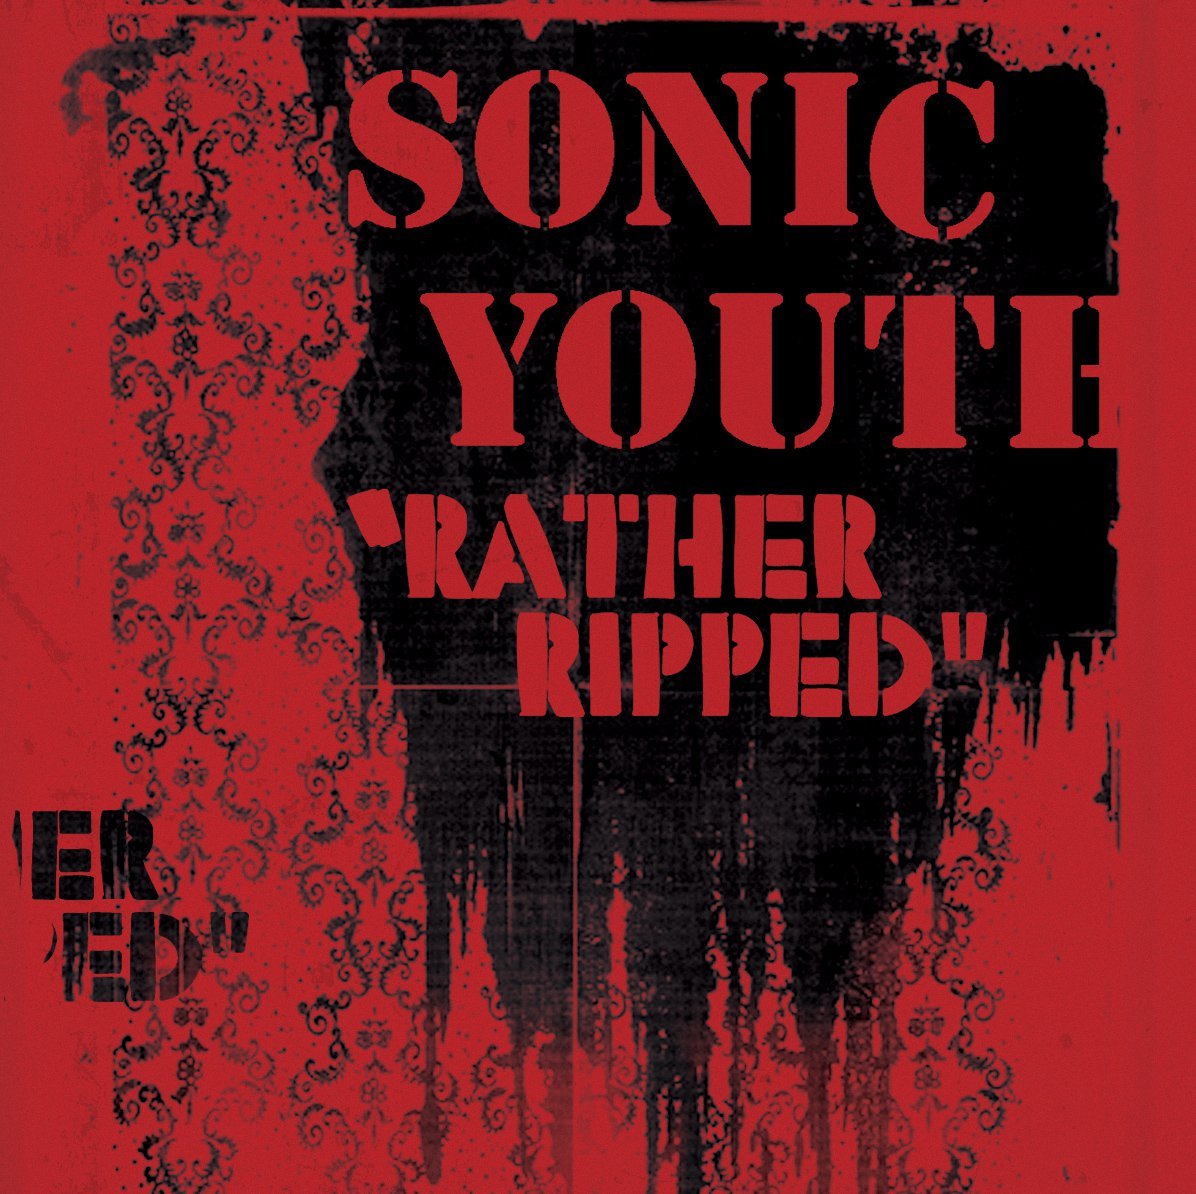 Happy Anniversary: Sonic Youth's 'Rather Ripped' Turns 10